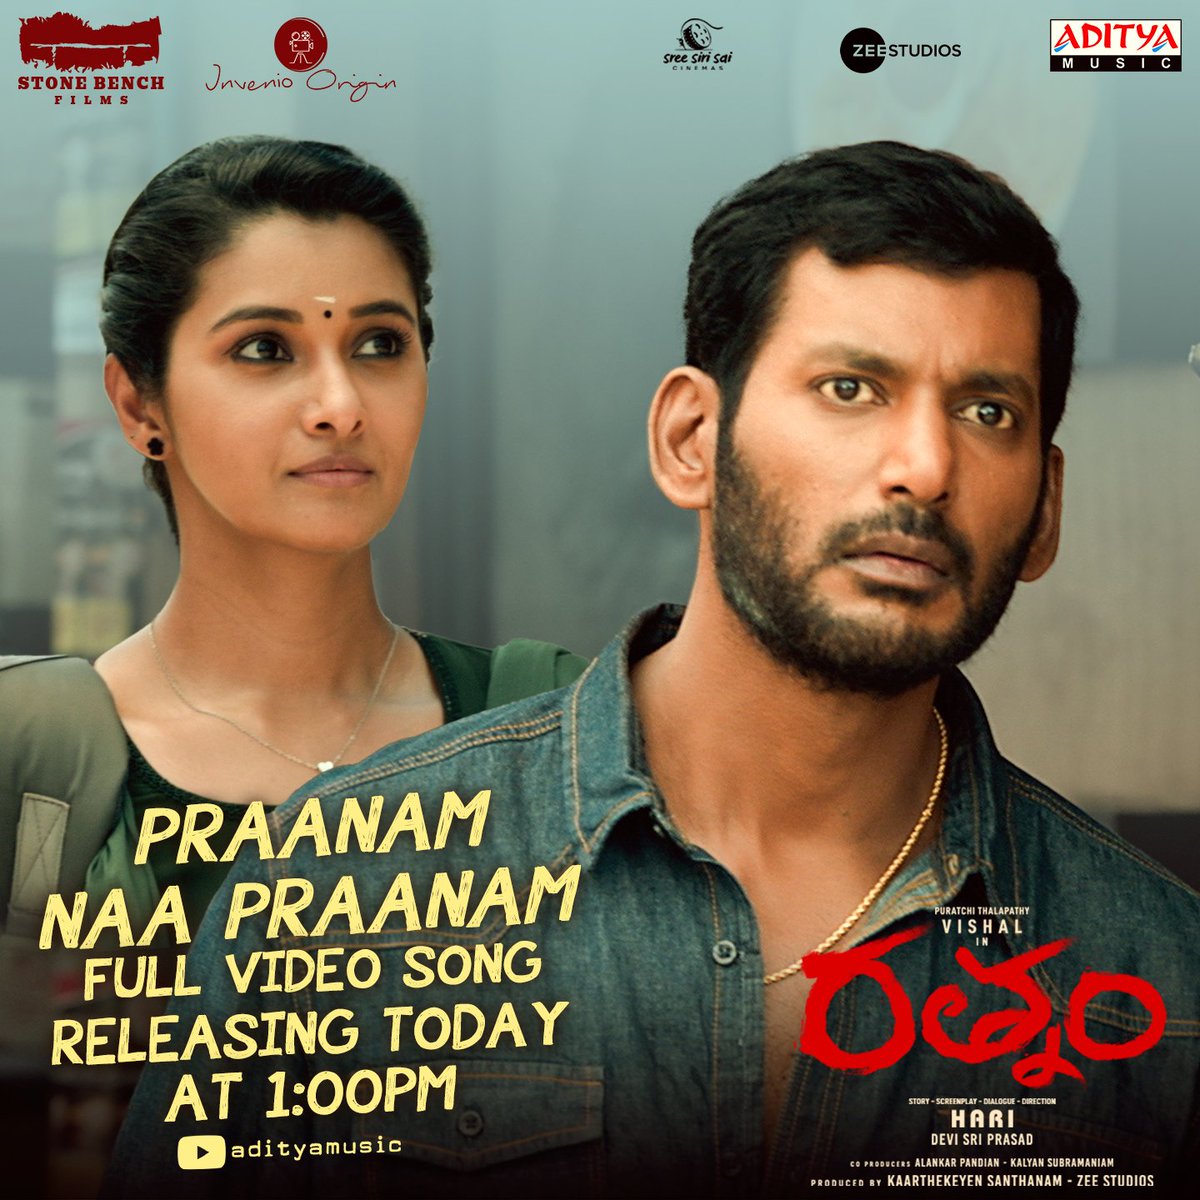 Feel the soulful vibes with #PraanamNaaPraanam video song from #Rathnam movie, releasing today at 1 PM. Starring Puratchi Thalapathy @VishalKOfficial. A film by #Hari A @ThisisDSP musical. @stonebenchers @ZeeStudiosSouth @priya_Bshankar @mynnasukumar #TSJay @dhilipaction